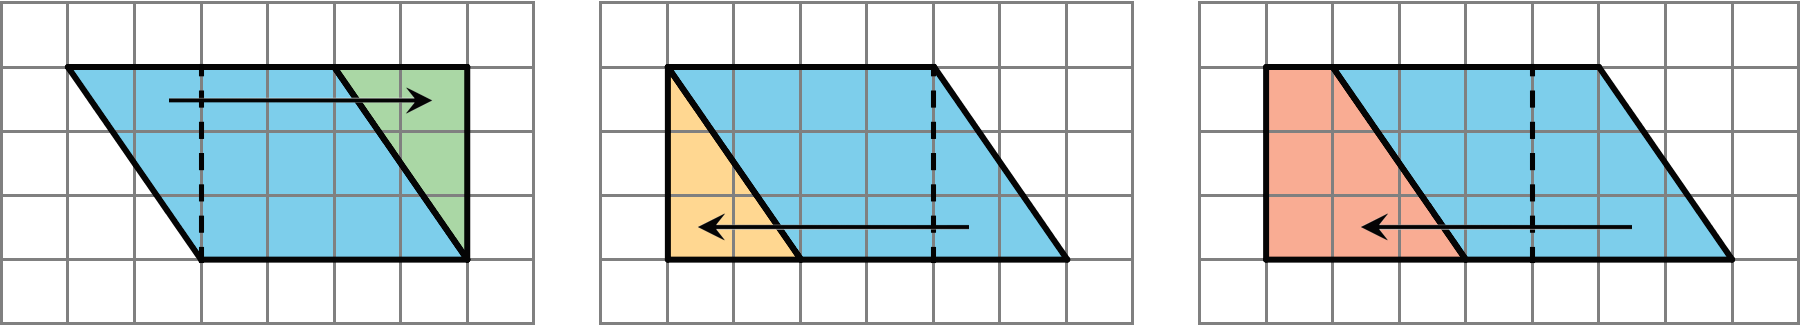 Three identical parallelograms with horizontal sides that are four units long, drawn in grids. The first parallelogram has a perpendicular segment extending from 2 units in from the top left down to the vertex of the bottom horizontal side. An arrow extends from the resulting triangle to the opposite side of the parallelogram to create a rectangle measuring 4 units wide and 3 units high. The second parallelogram has a perpendicular segment extending from 2 units in from the bottom right up to the vertex of the top horizontal side. An arrow extends from the resulting triangle to the opposite side of the parallelogram to create a rectangle measuring 4 units wide and 3 units high. The third parallelogram has a perpendicular segment extending from 3 units in from the bottom right up to the vertex of the top horizontal side. An arrow extends from the resulting shape to the opposite side of the parallelogram to create a rectangle measuring 4 units wide and 3 units high.